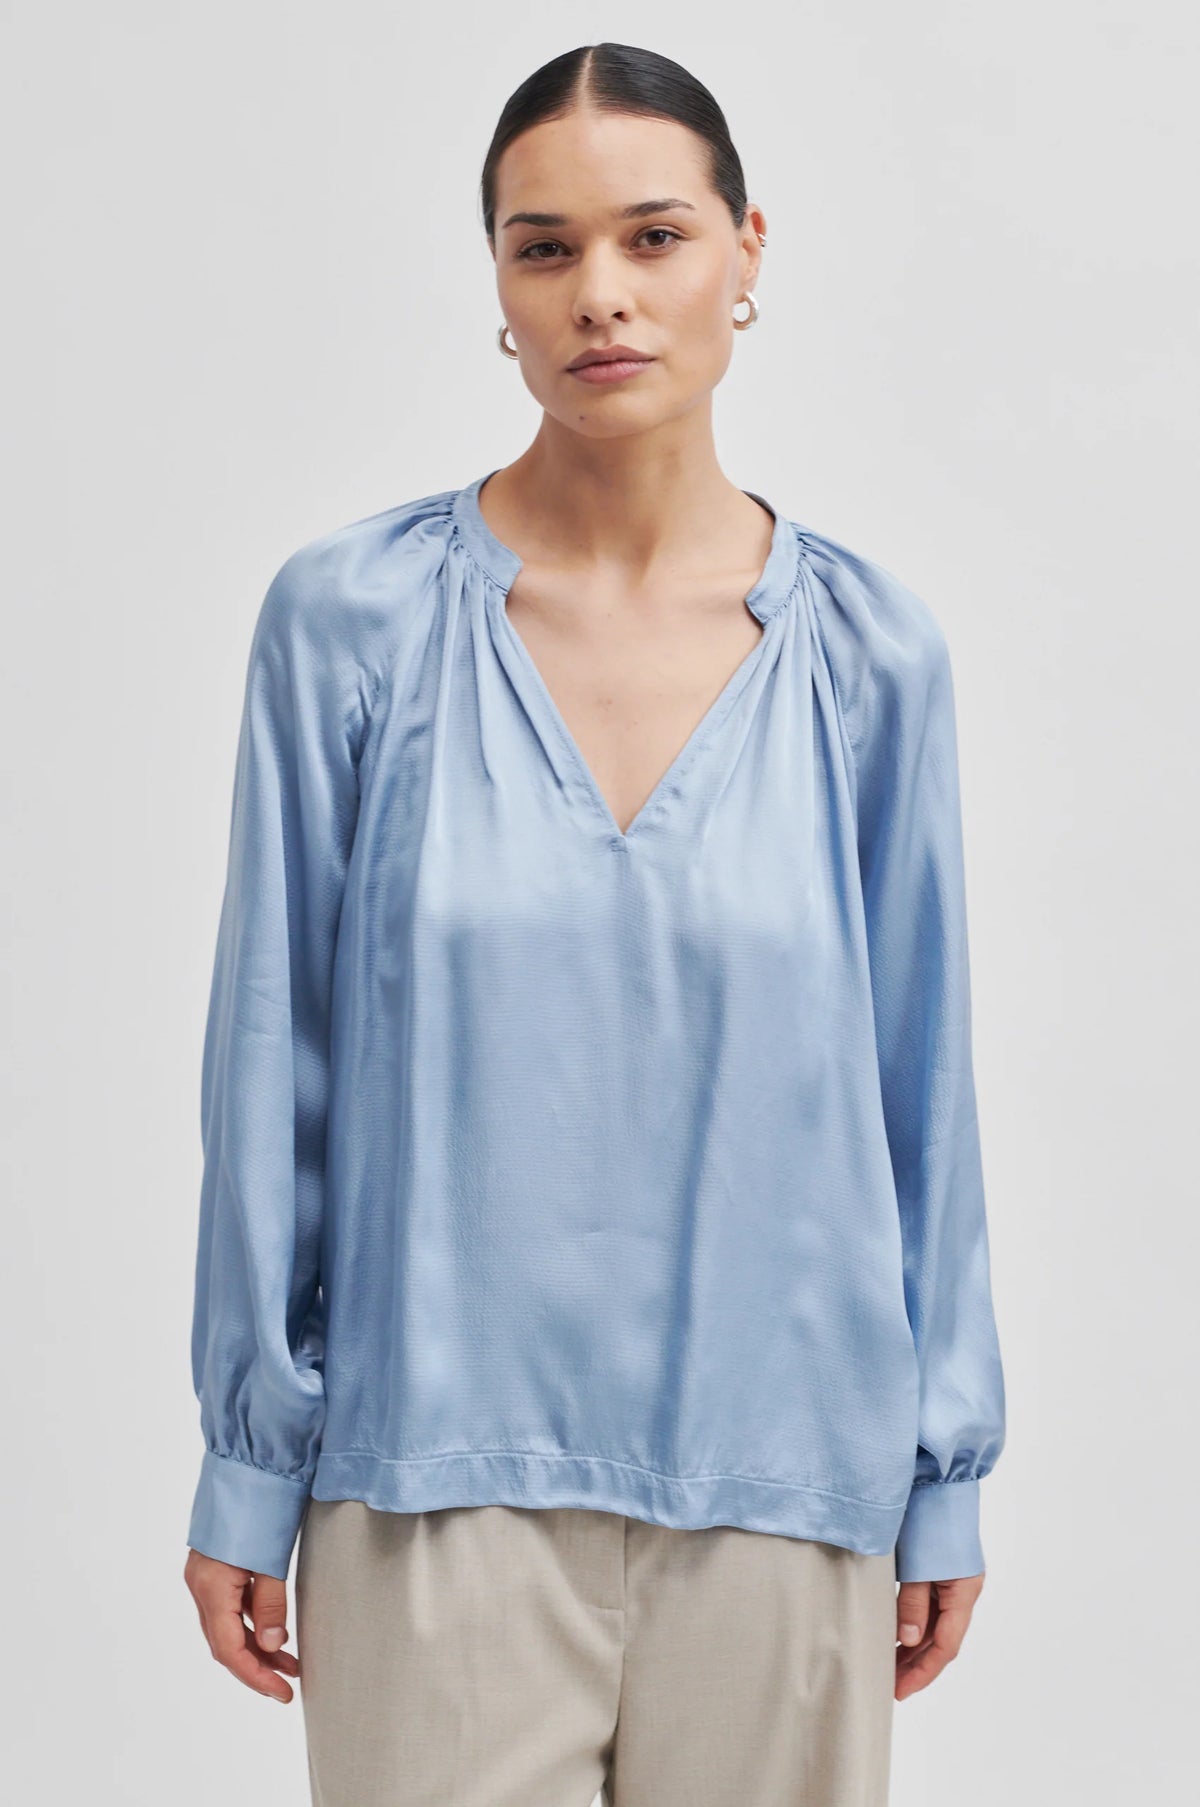 Long sleeved blue textured fabric notch neck top with raglan sleeves and gathered neckline